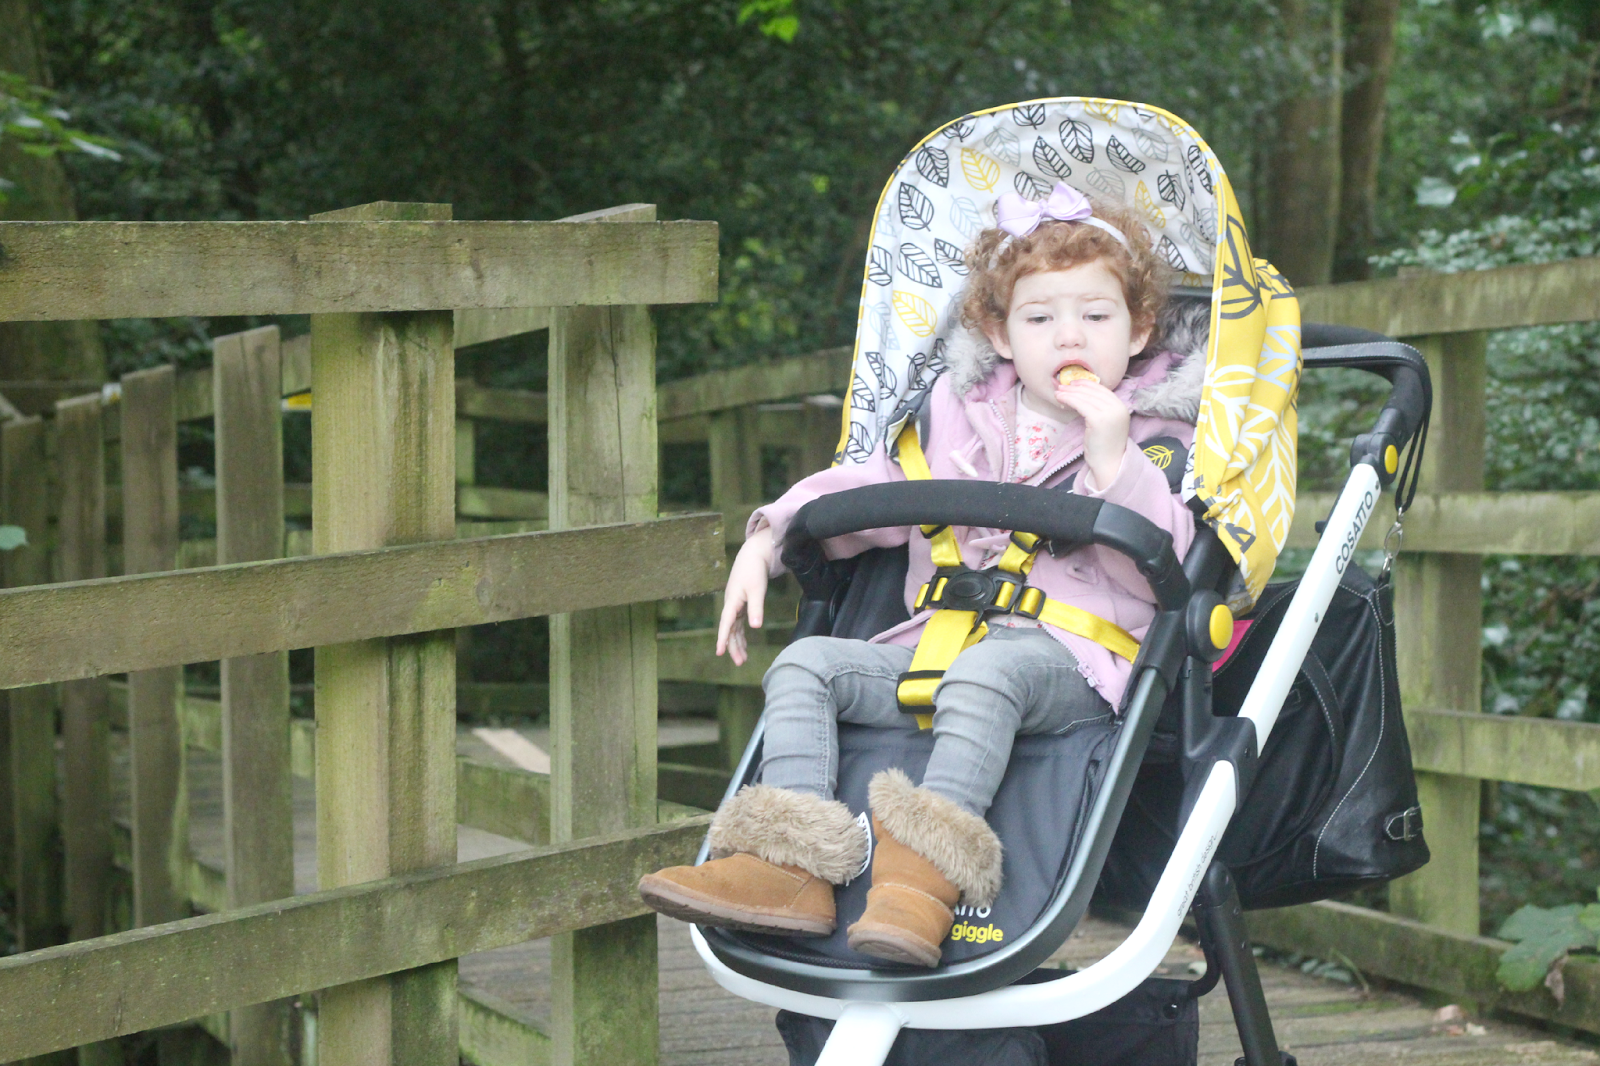 cosatto giggle travel system reviews